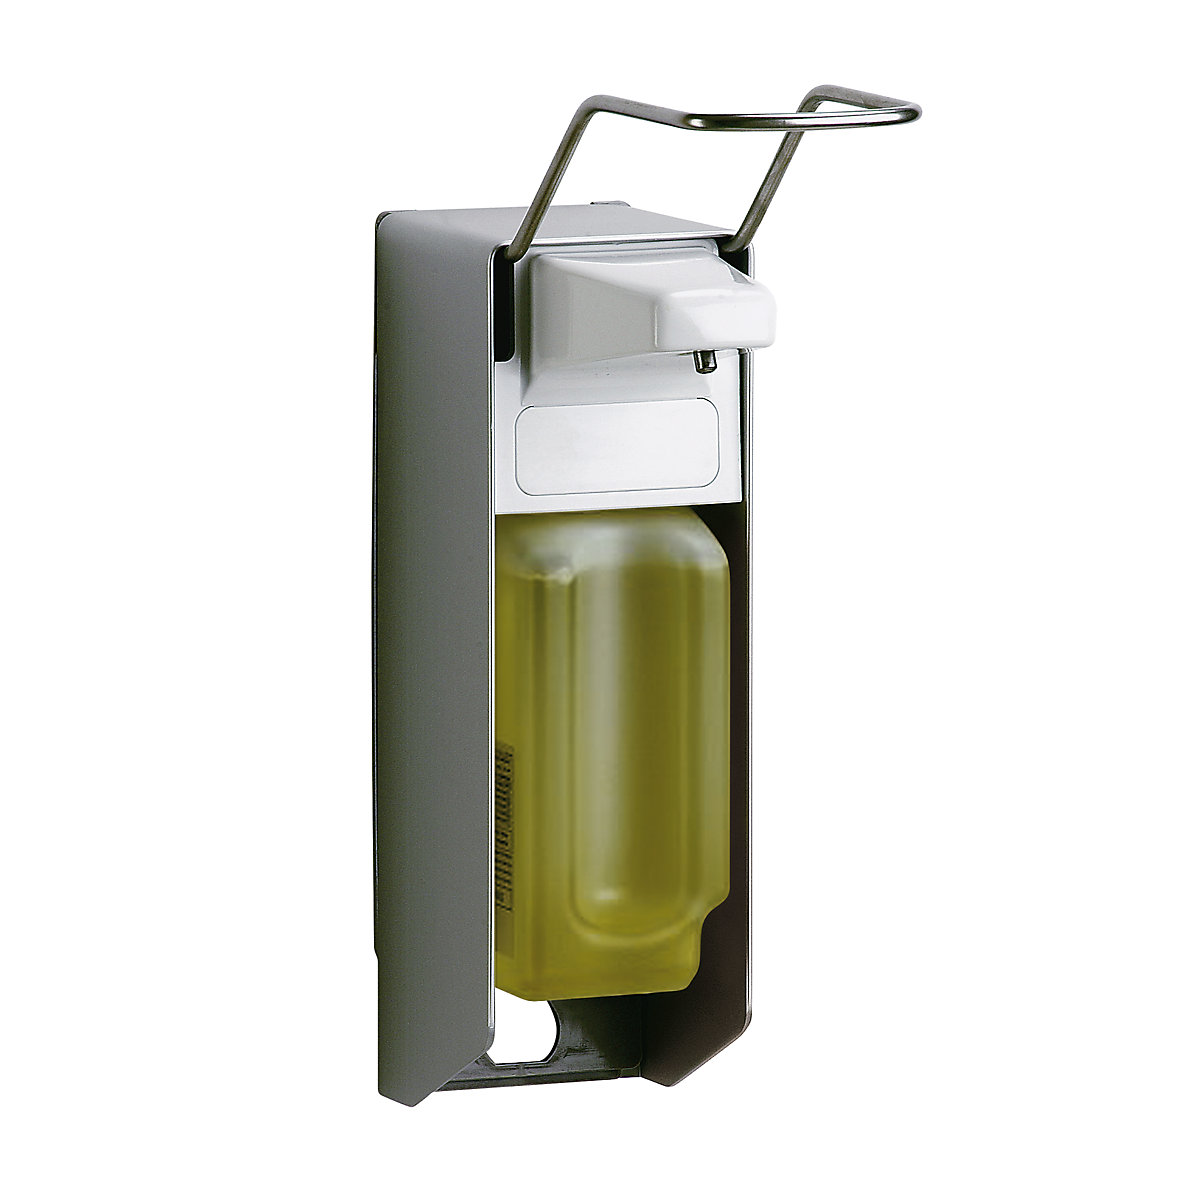 Universal dispenser, 0.5 l, for wall mounting - CWS